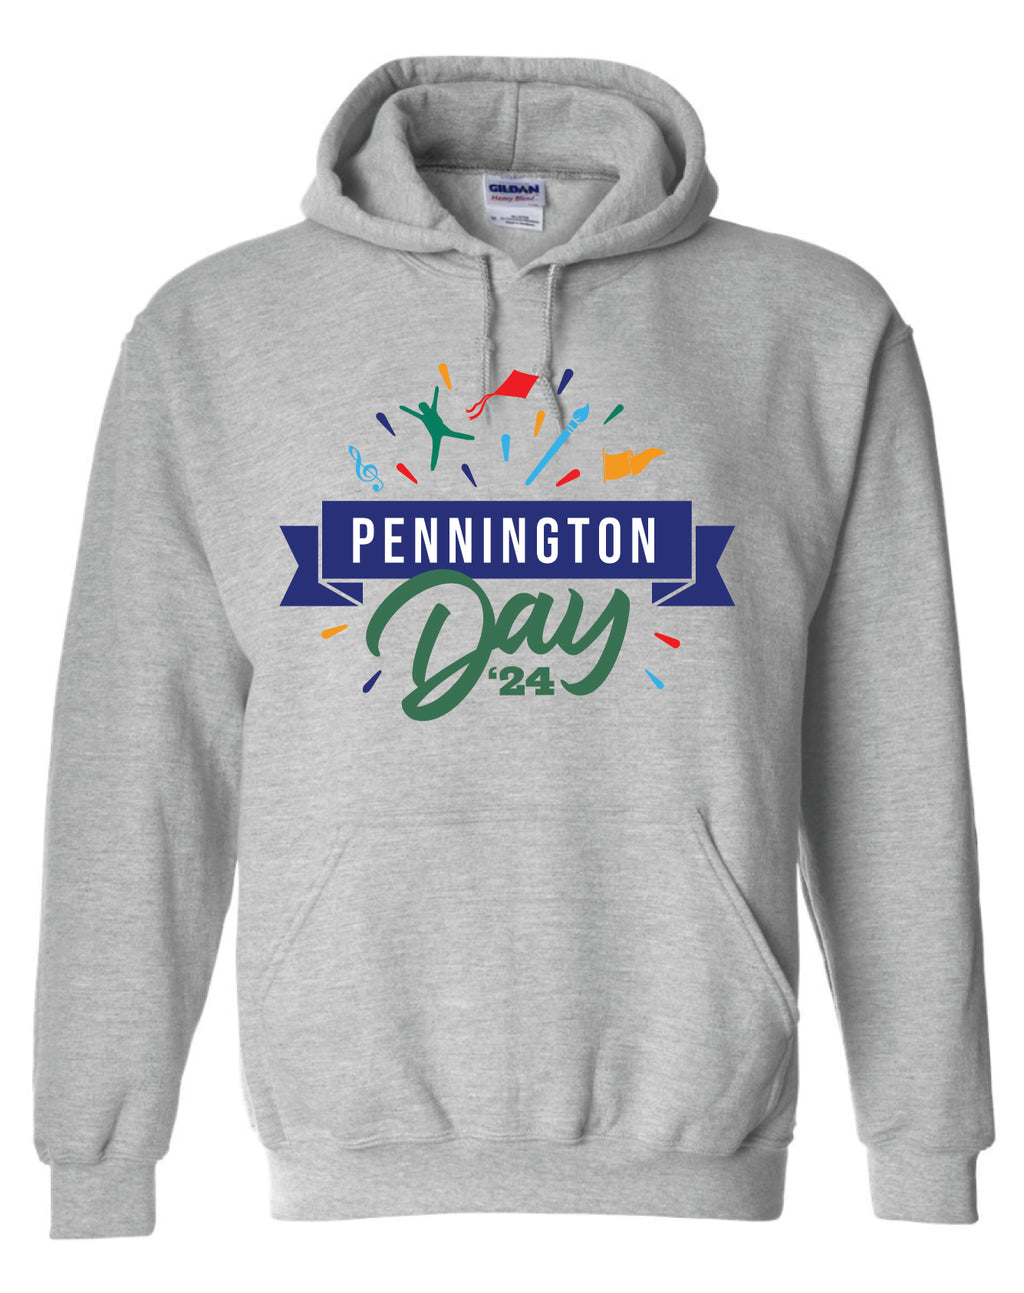 Pennington Day Gray Hoodie - Adult and Youth